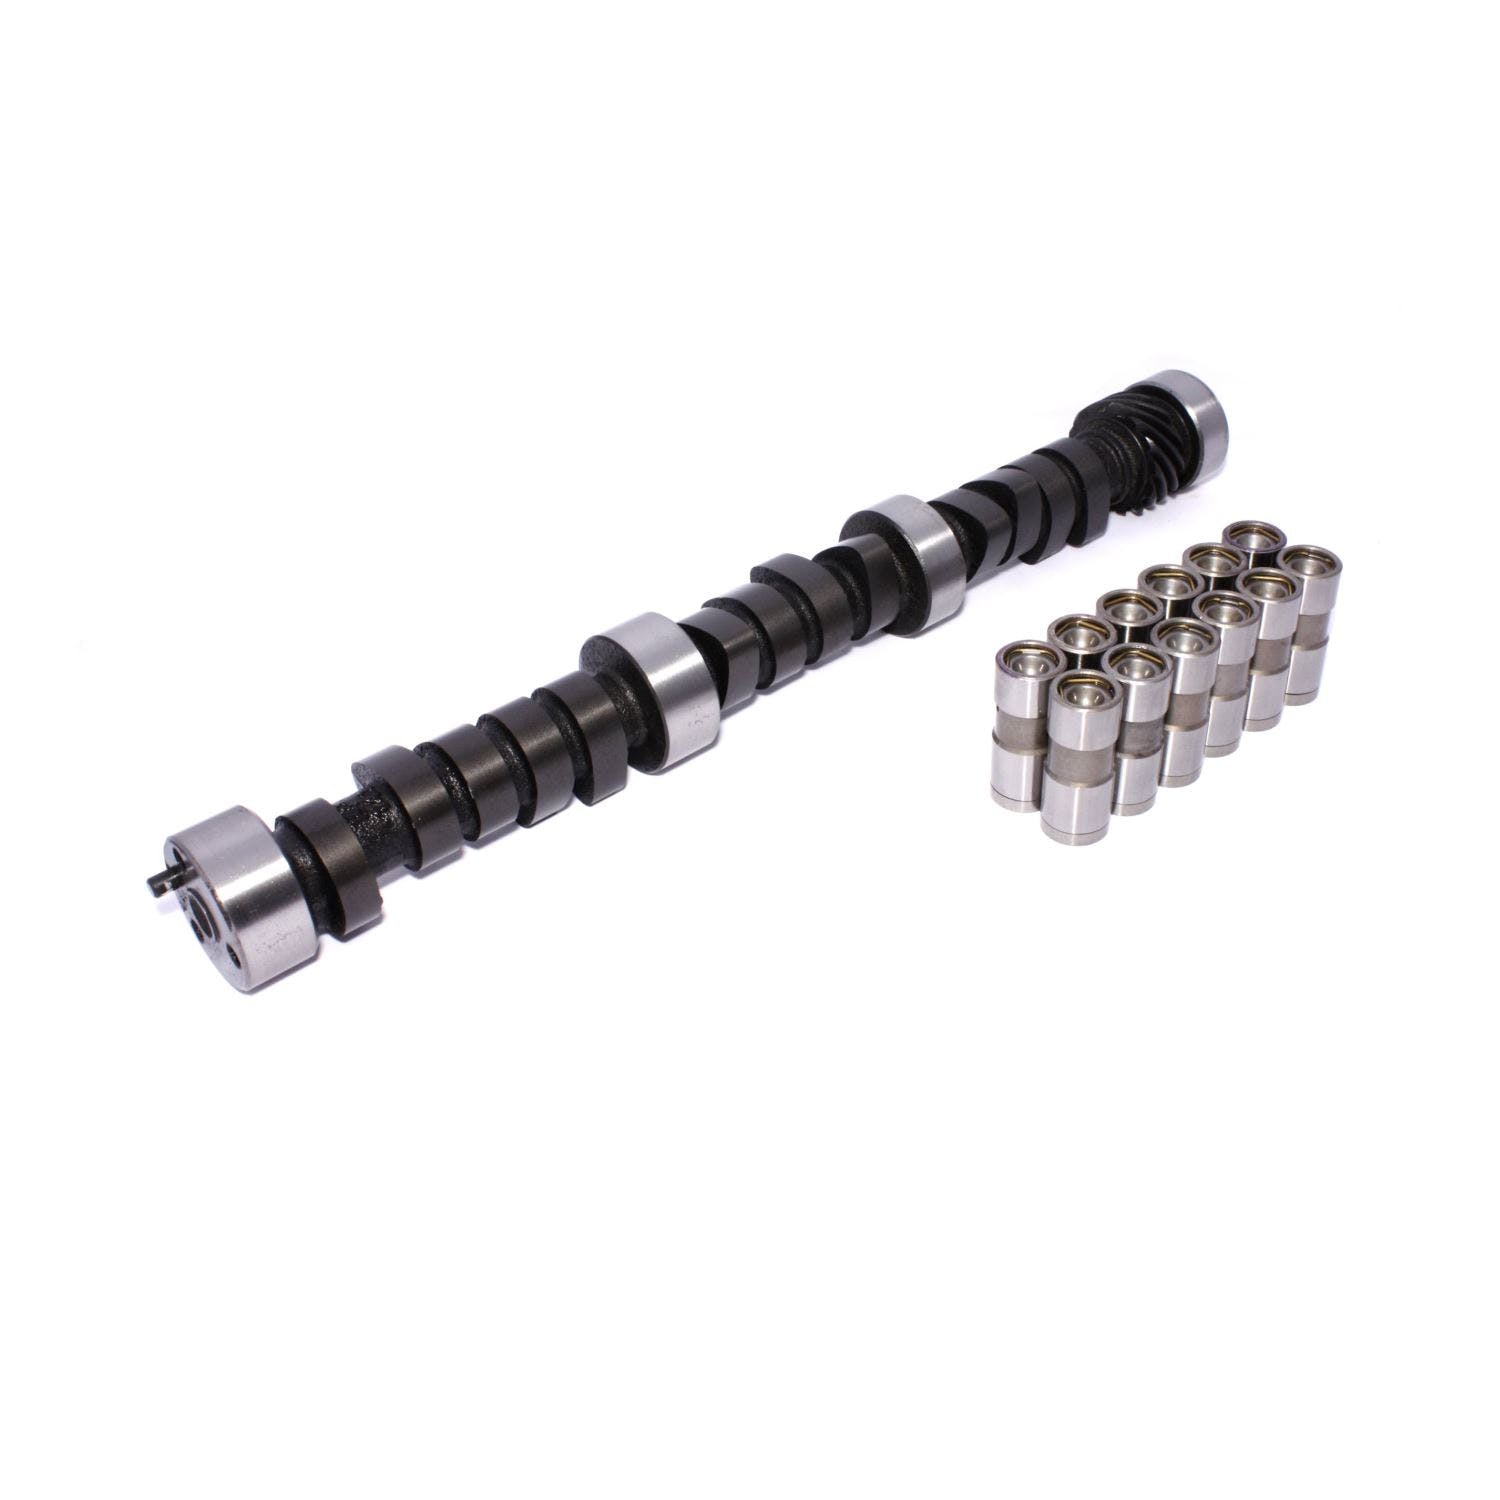 Competition Cams CL18-115-4 High Energy Camshaft/Lifter Kit